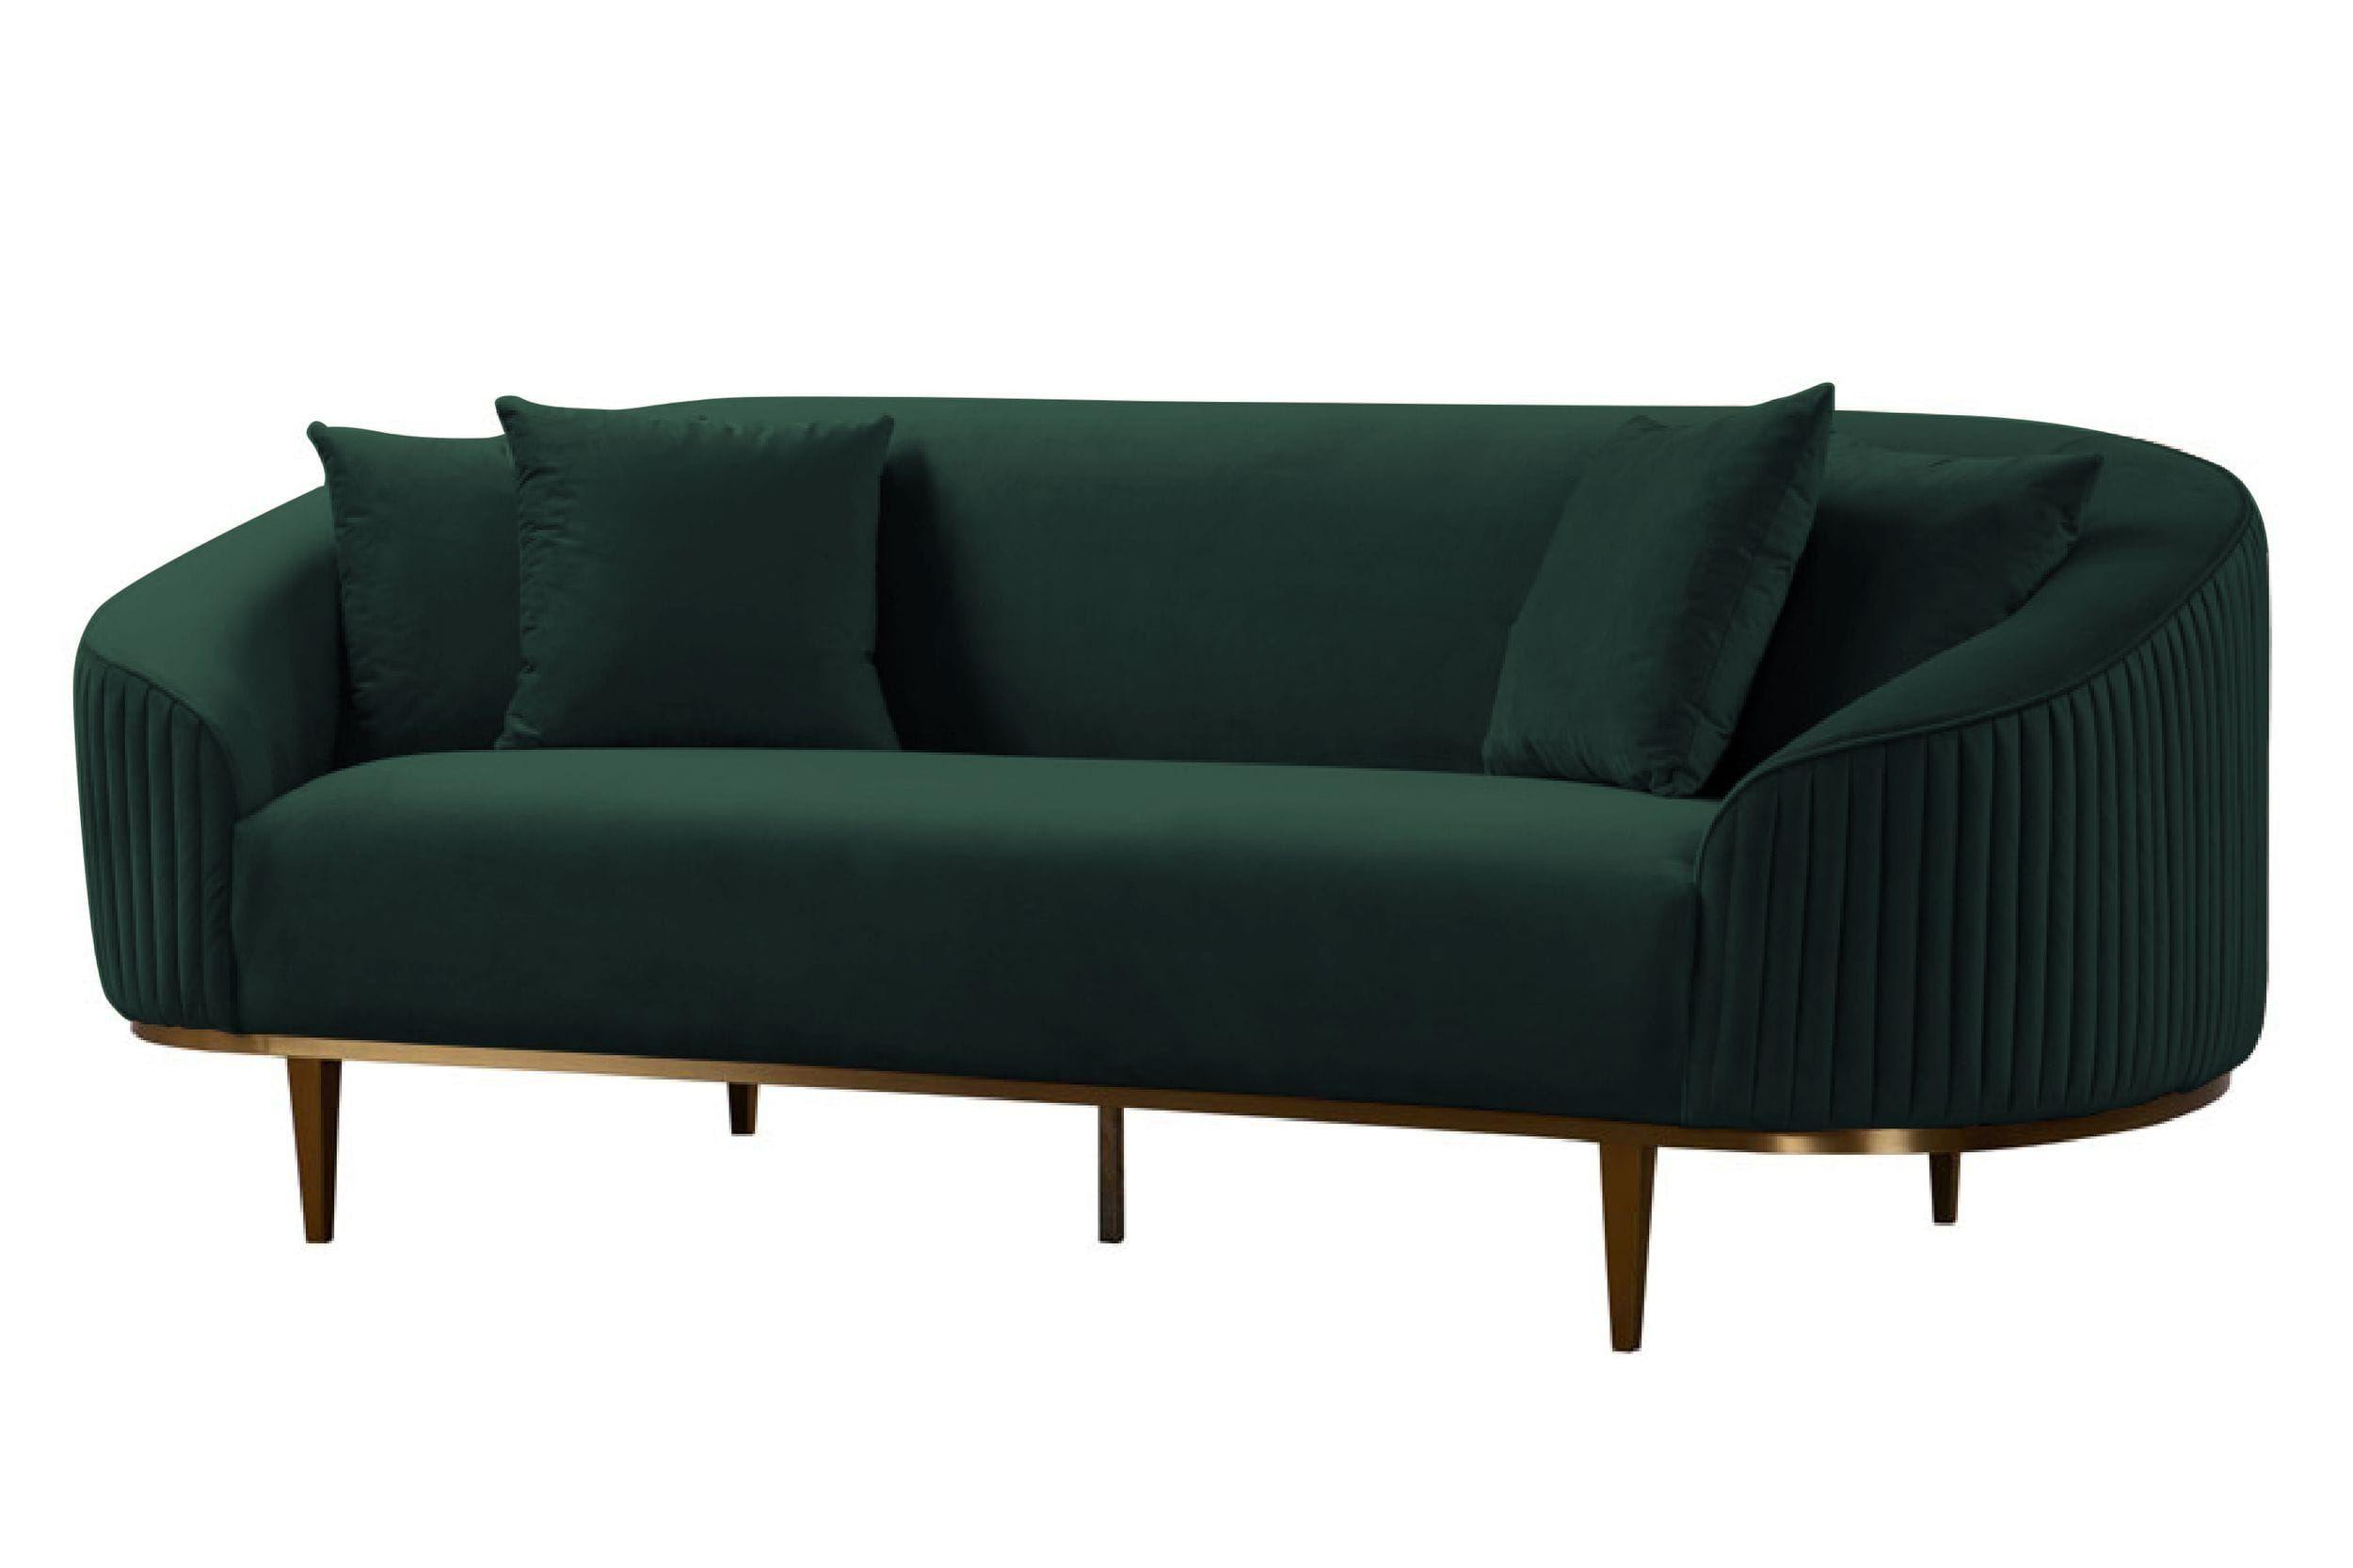 Contemporary, Modern Sofa VGMFMF-0126-S VGMFMF-0126-S in Green Fabric